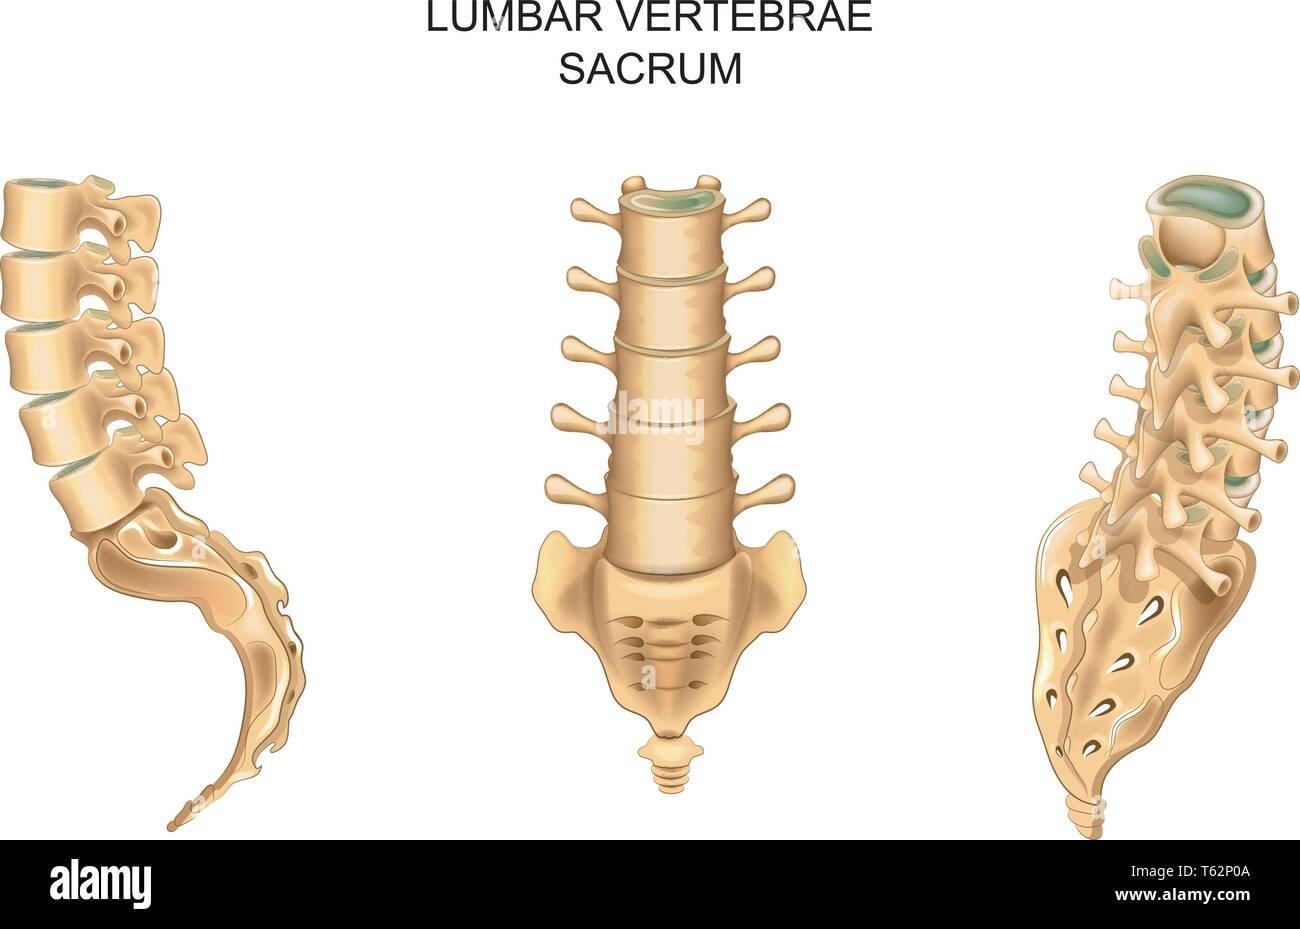 vector illustration of sacrum and lumbar vertebrae in different positions Stock Vector